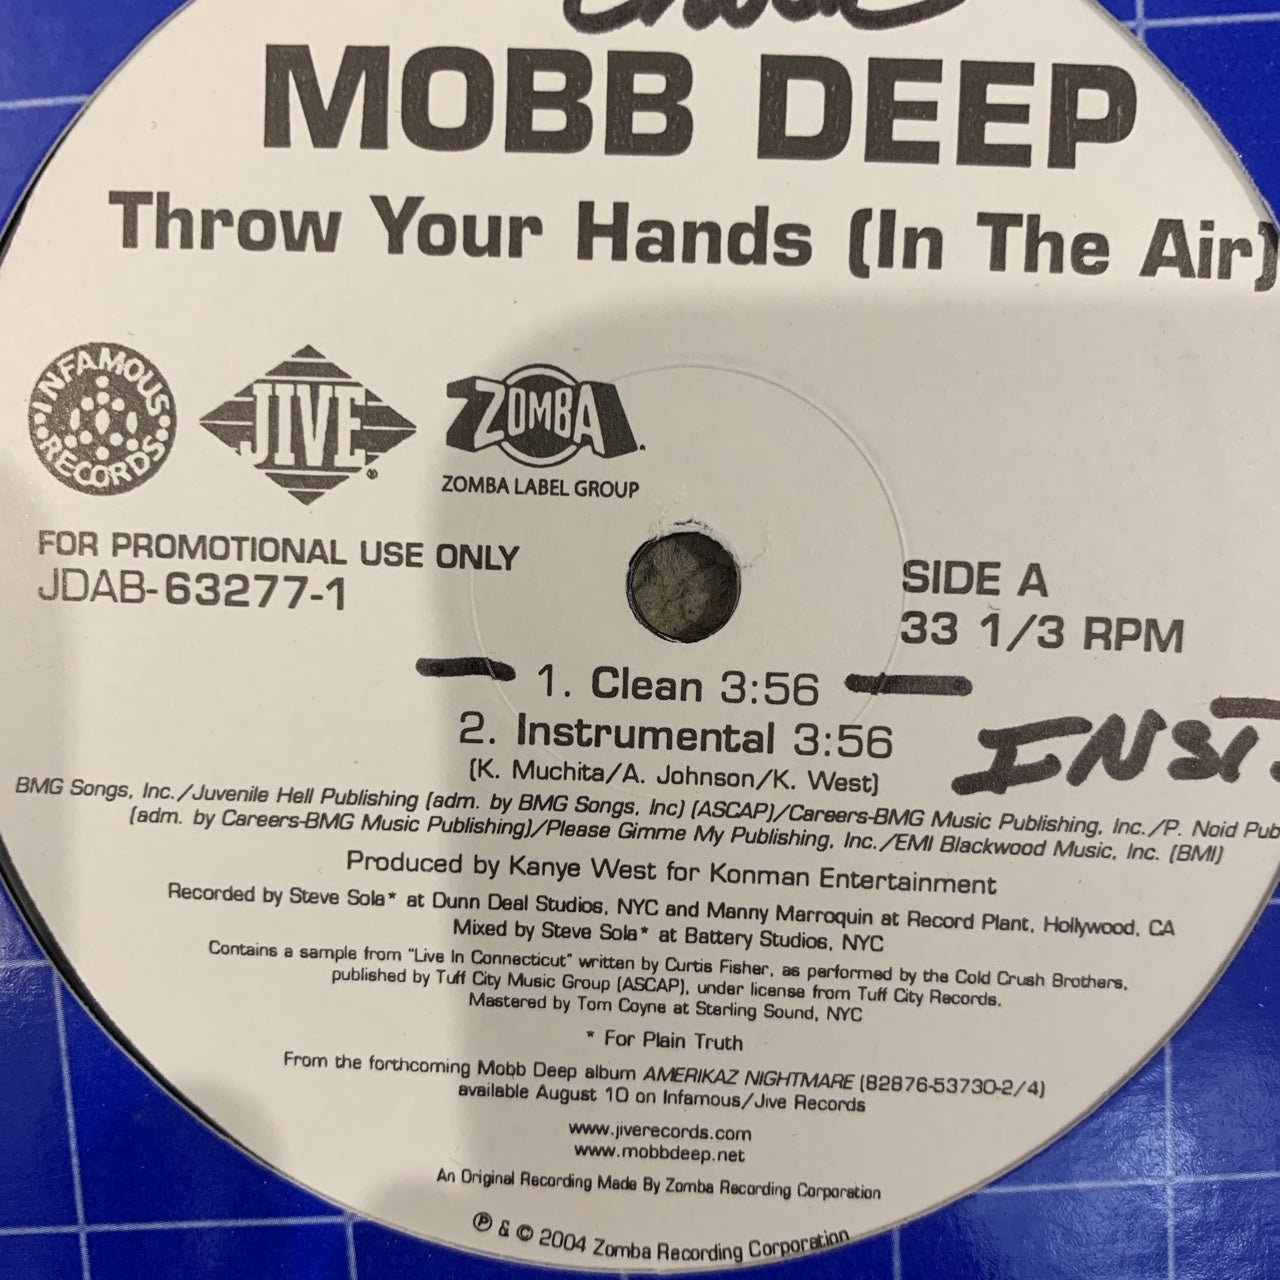 Mobb Deep “Throw Your Hands (In The Air)”